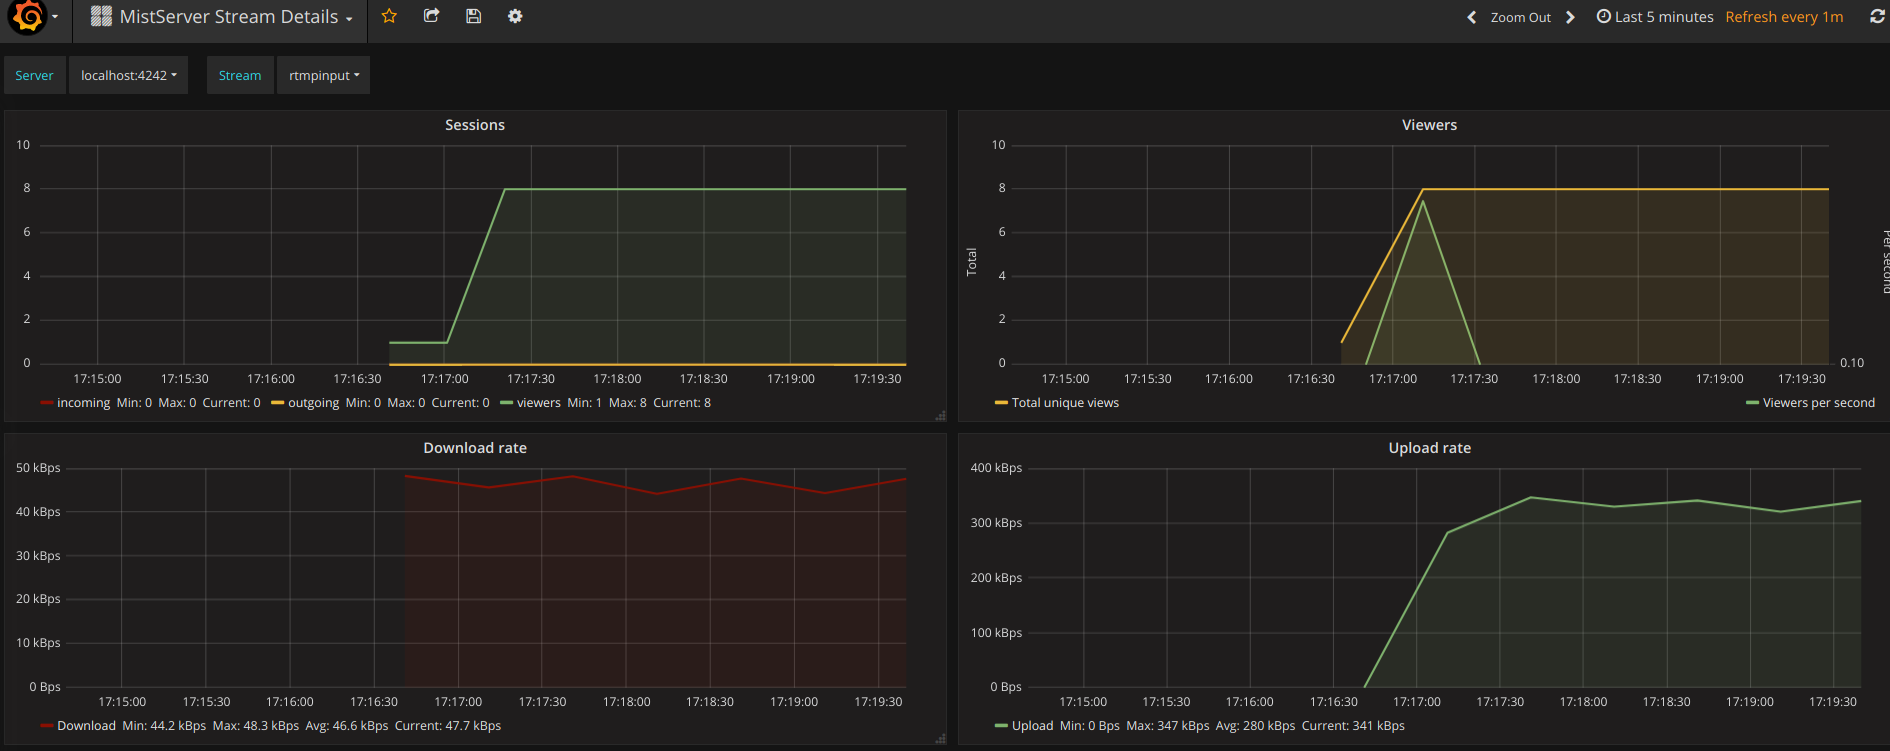 Image of the MistServer Stream Details Dashboard in grafana